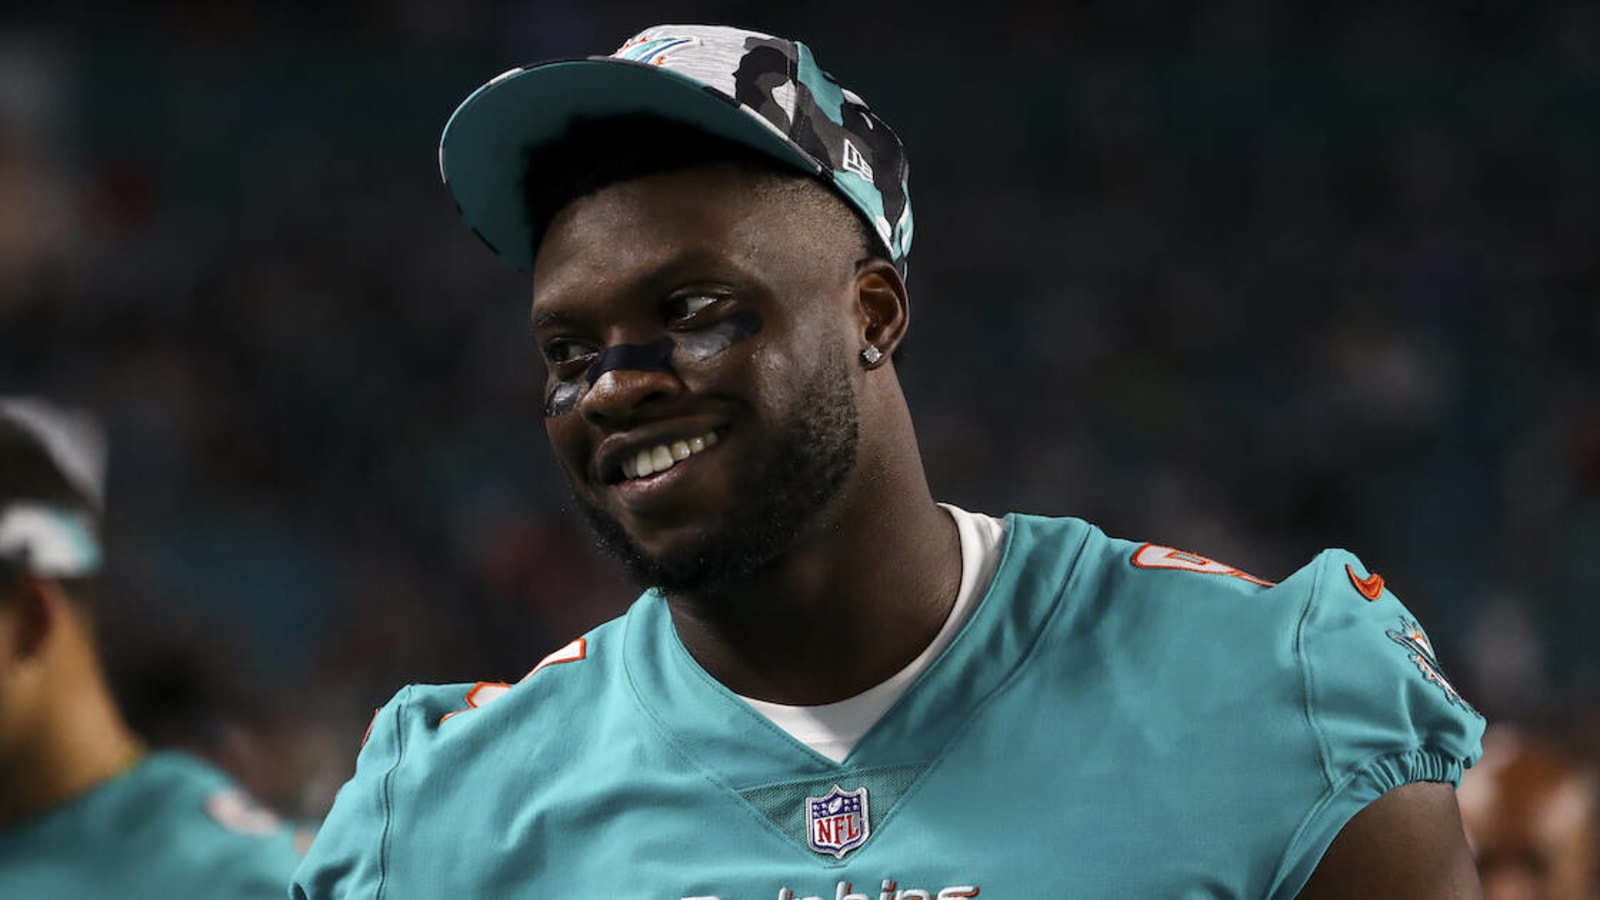 Emmanuel Ogbah says sky is the limit for Dolphins new and improved defense